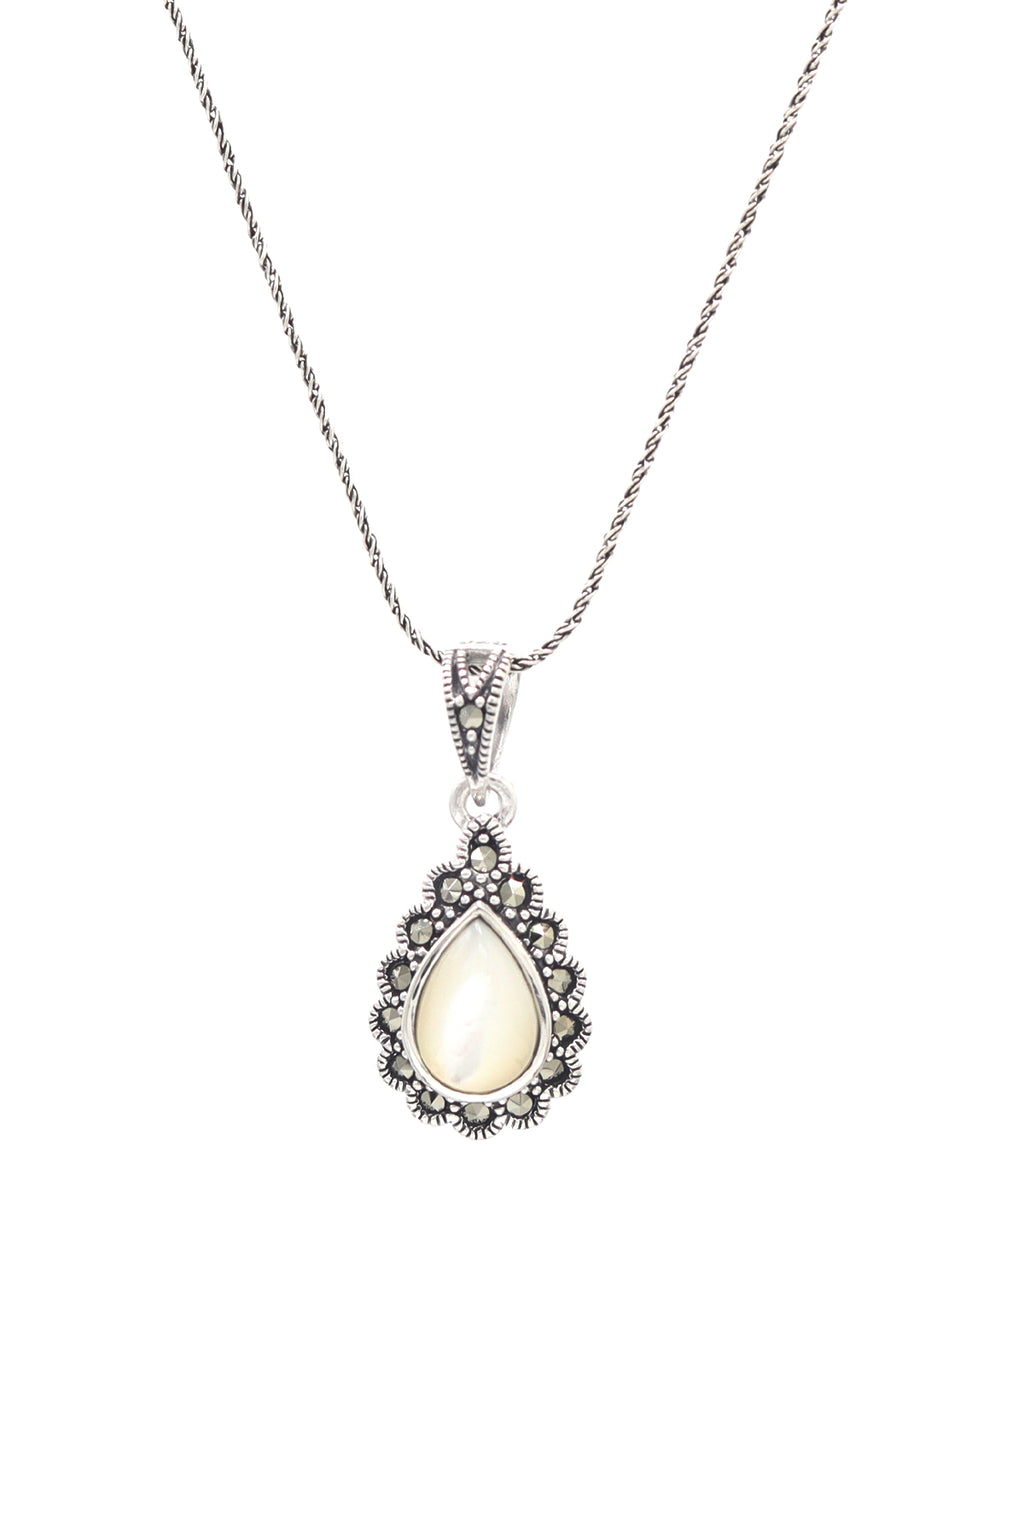 Drop Model Authentic Silver Necklace With Mother of Pearl (NG201021622)